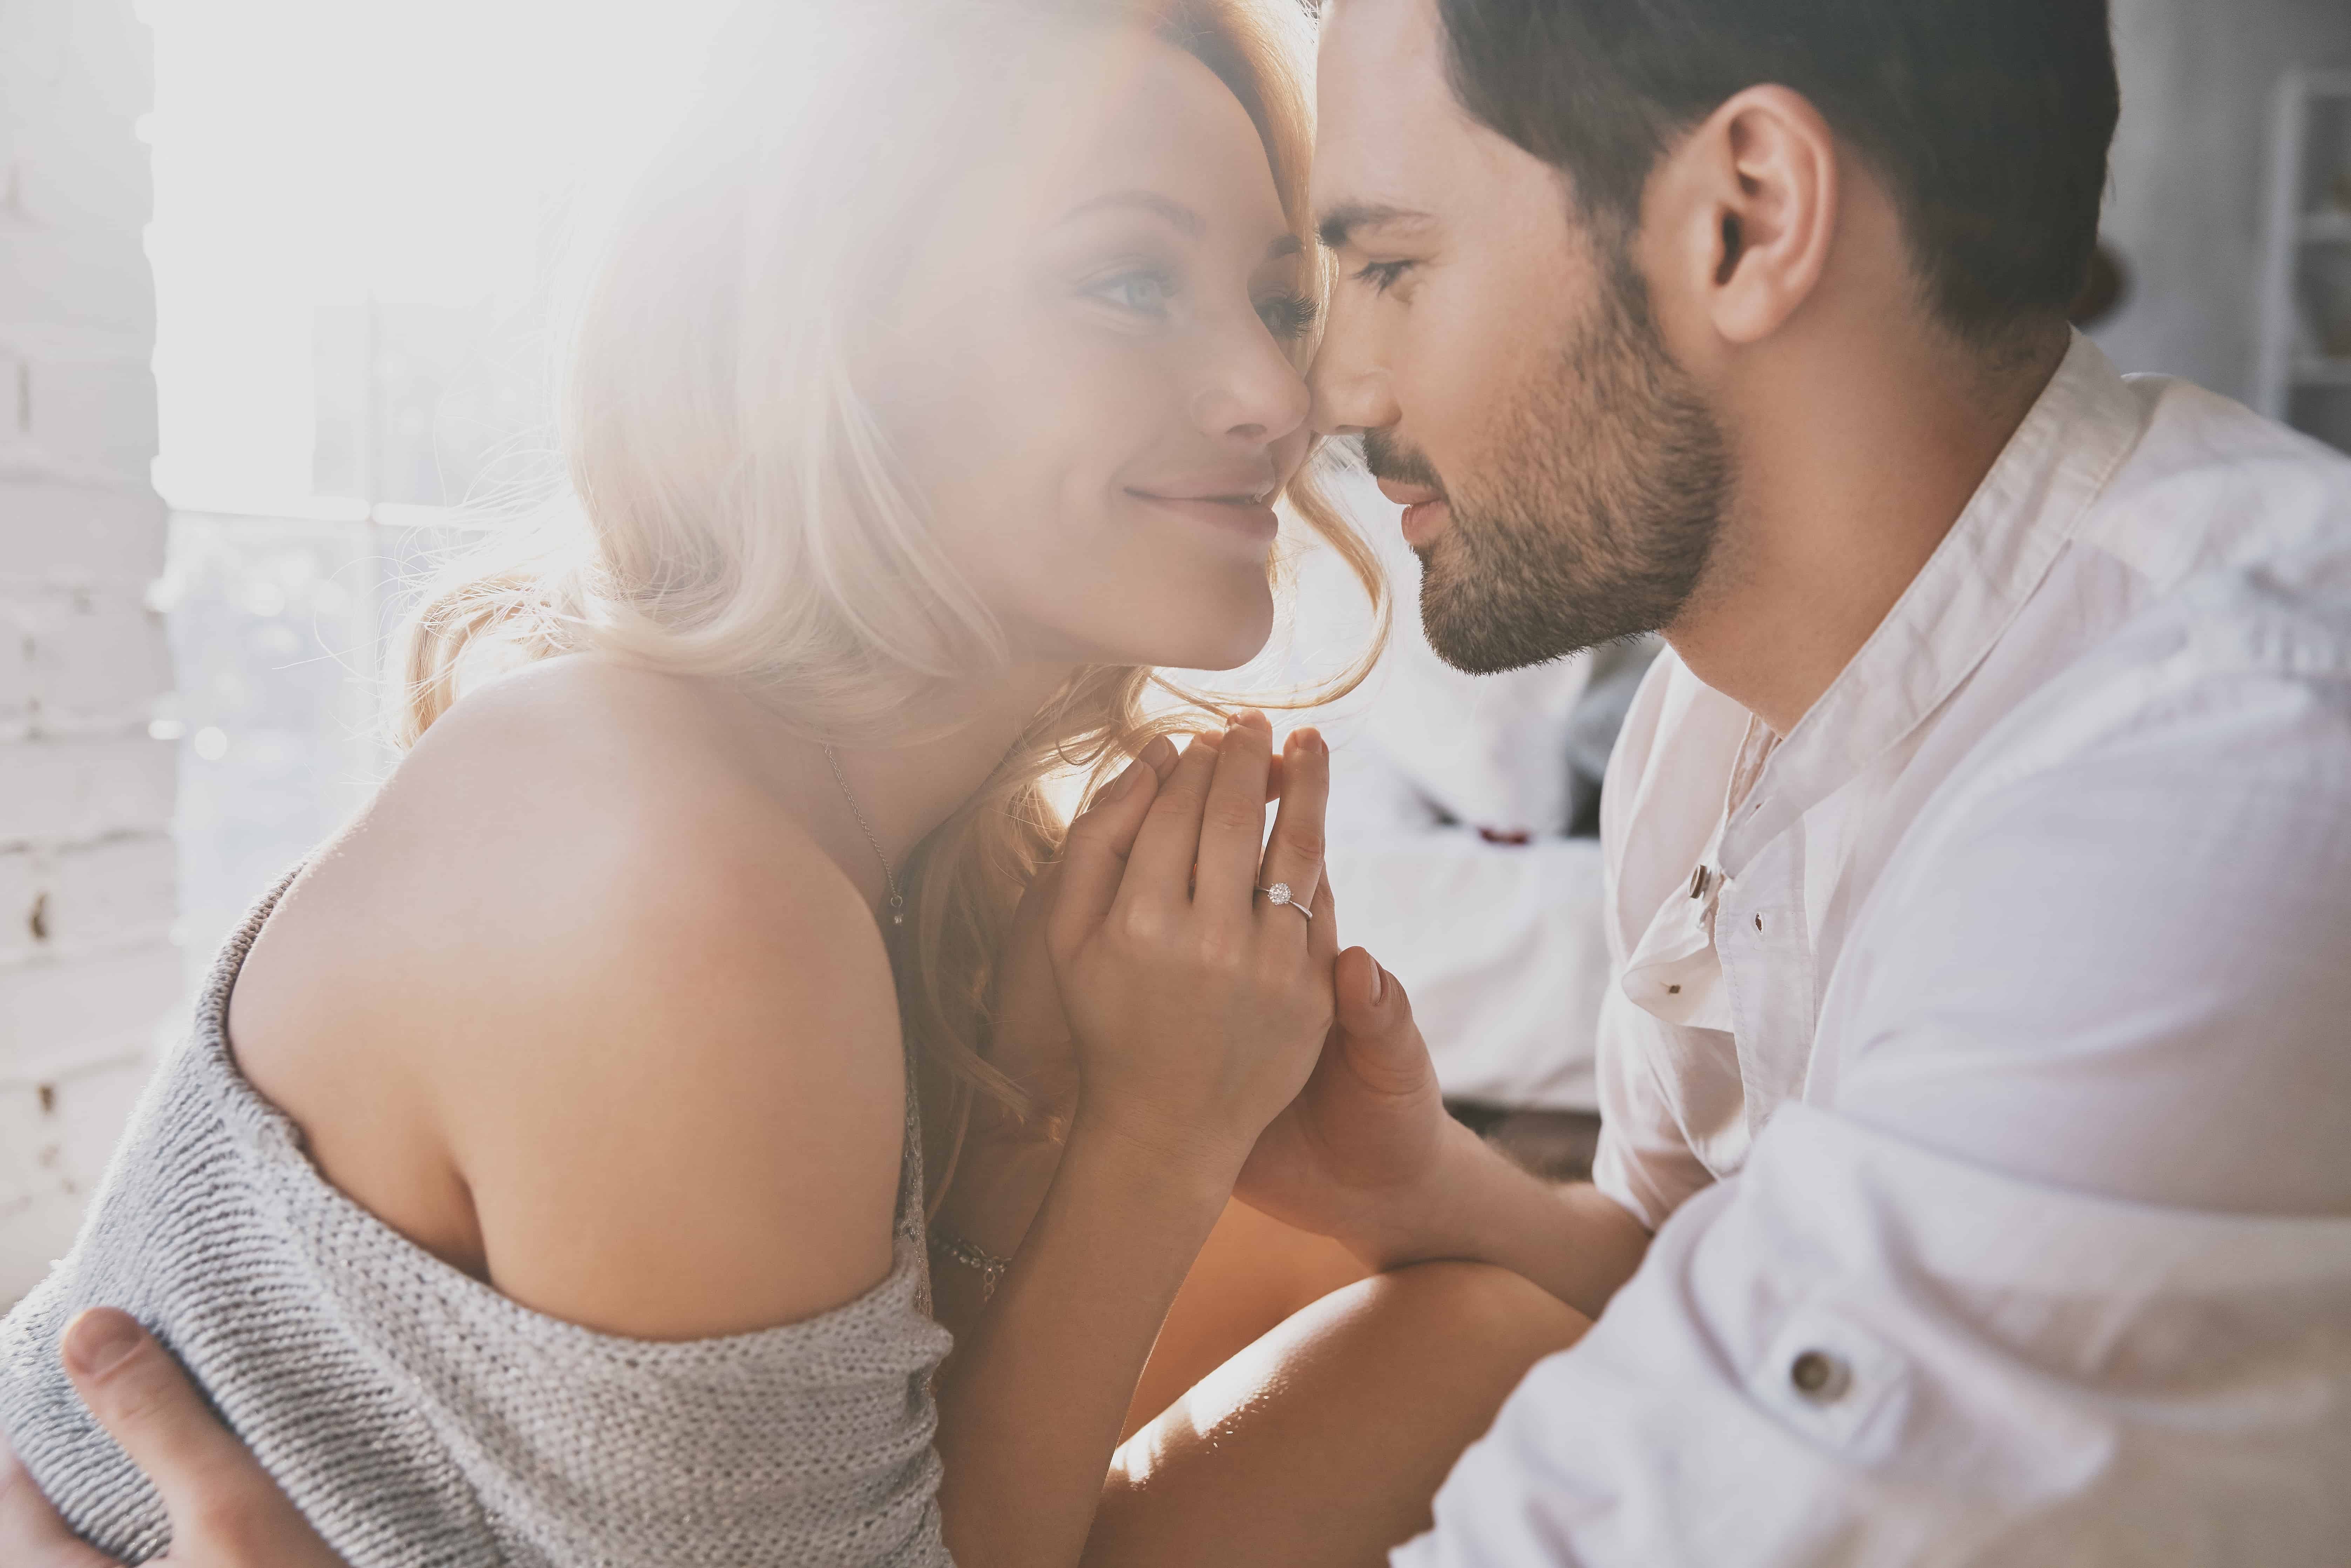 9 Tricks to Confidently Pick Up Any Woman